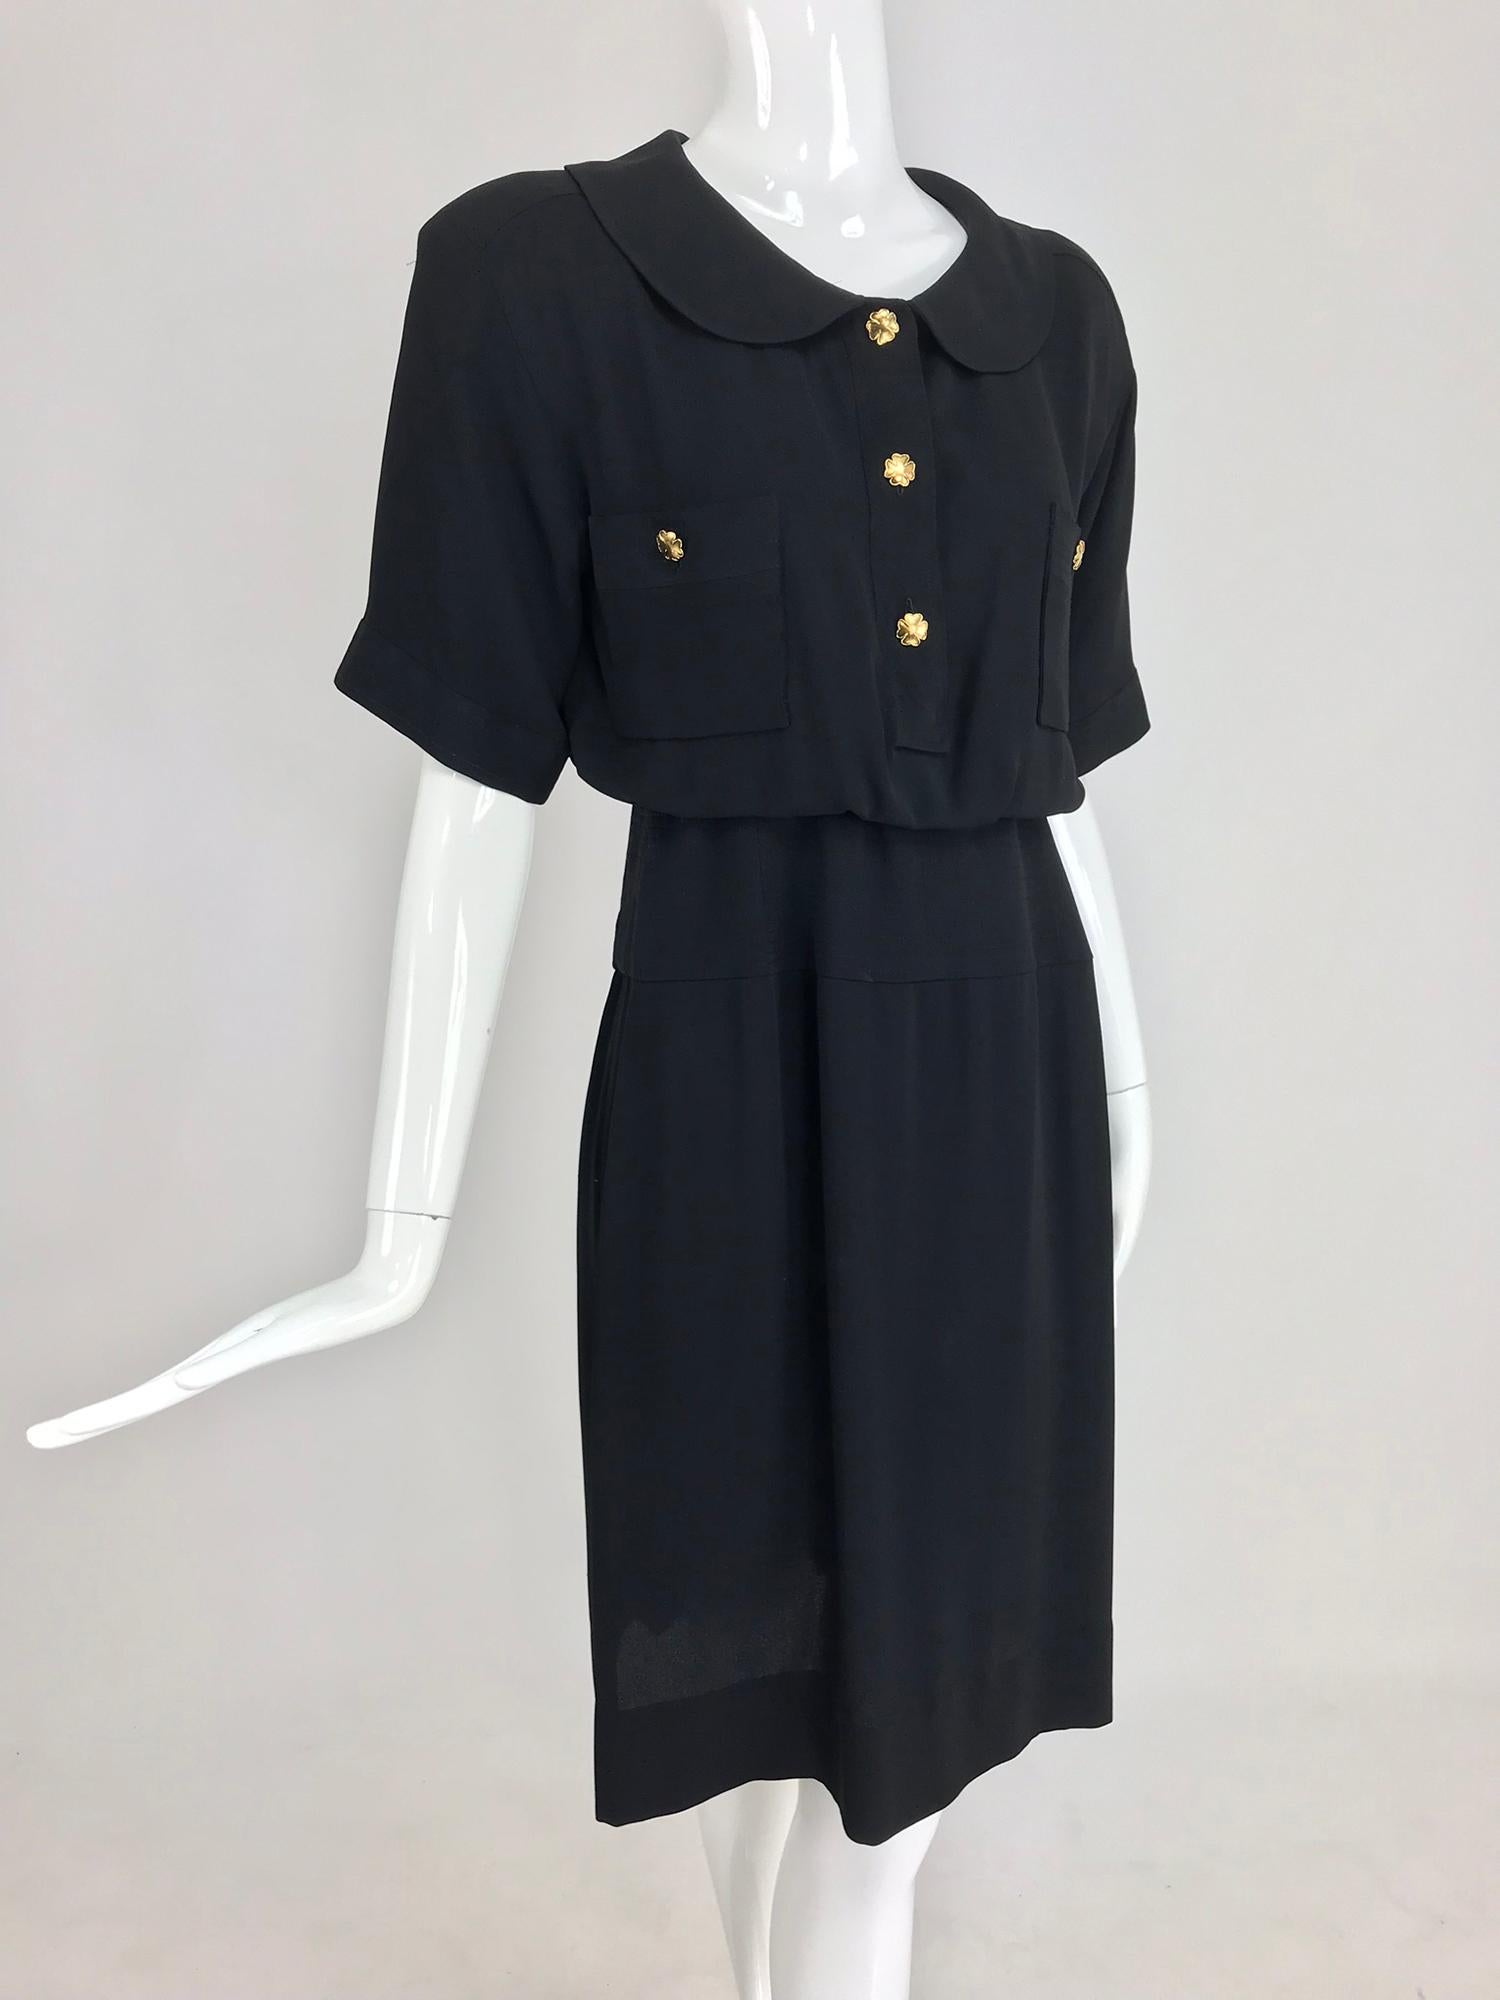 Chanel vintage black crepe shirtwaist day dress. Classic shirtwaist style dress with cuffed, short sleeves, round collar at the neckline, button front bust patch pockets and button front with gold Chanel 4 leaf clover buttons, the dress has a cased